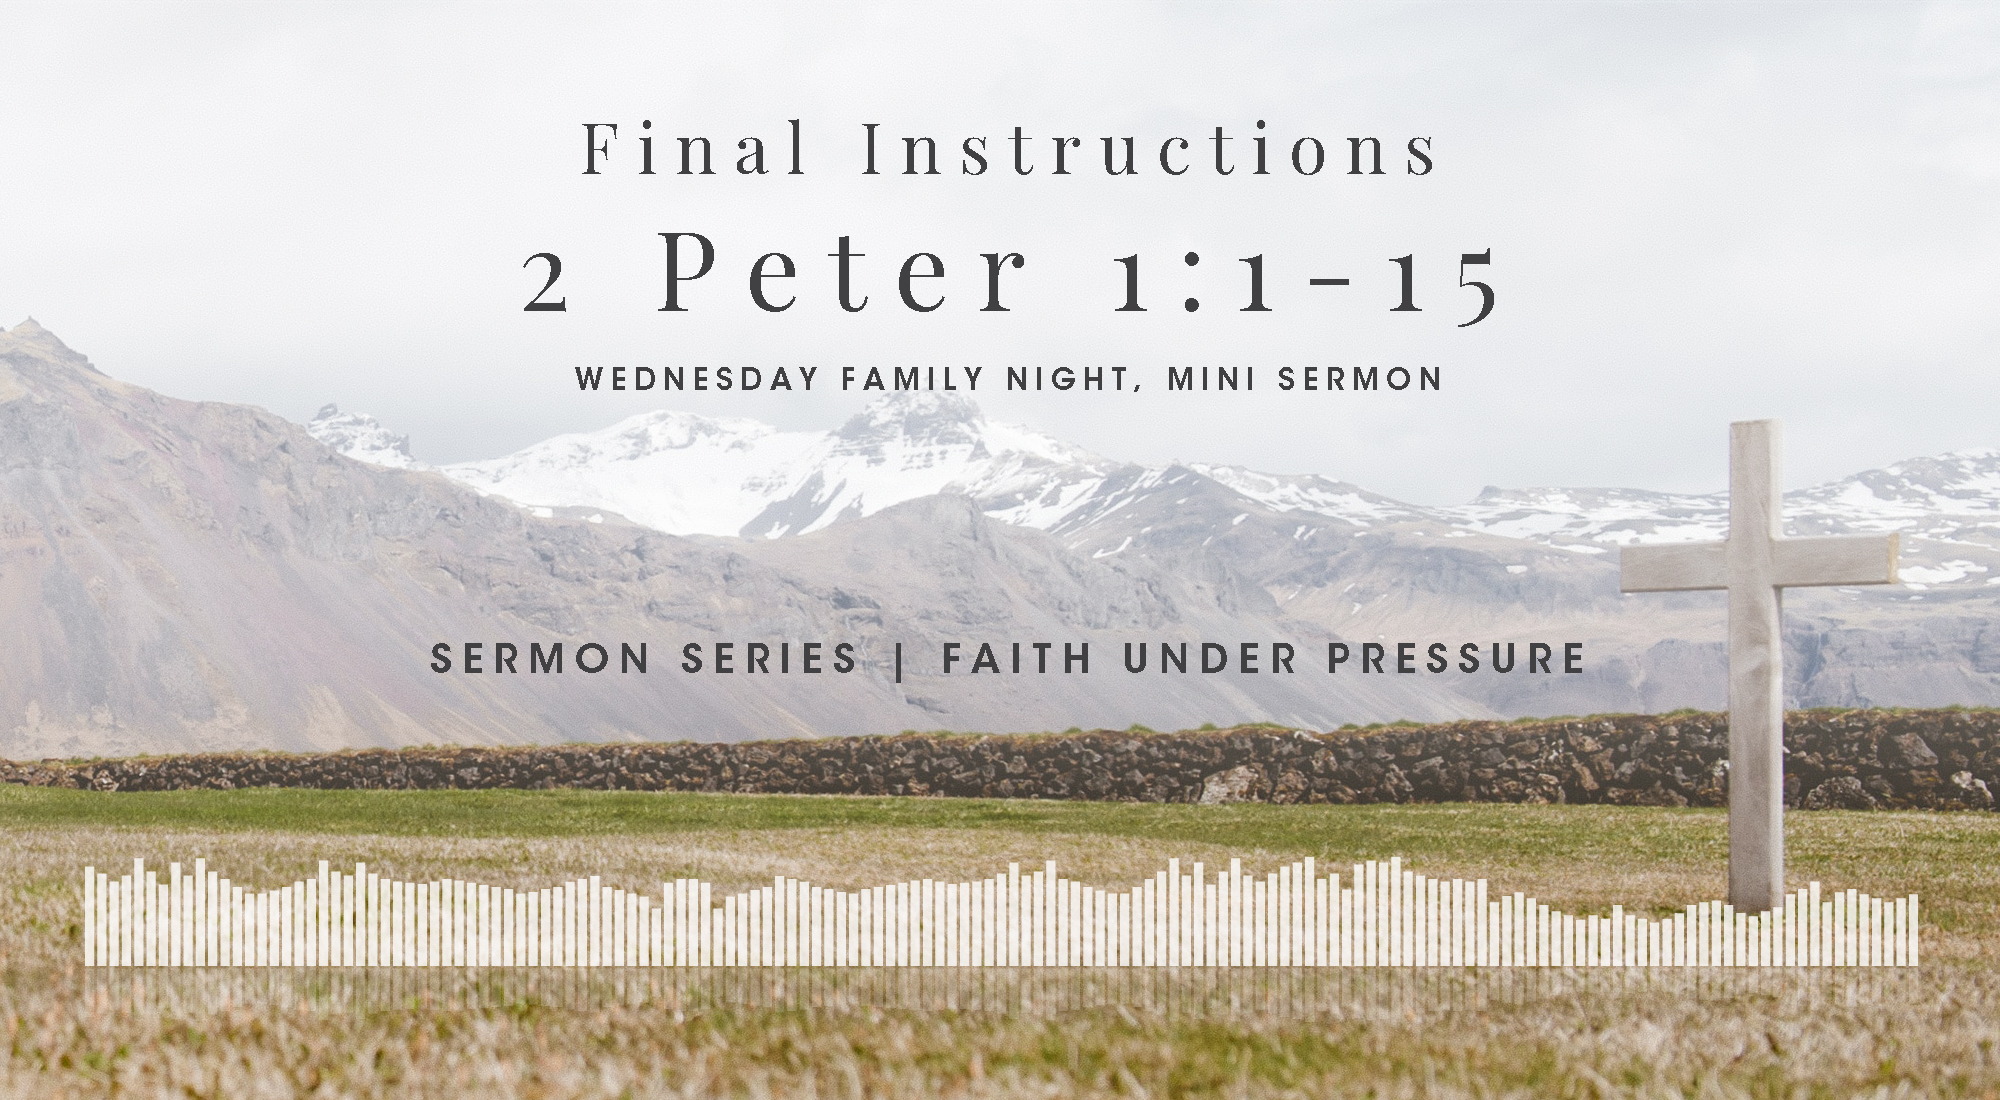 A Mini Bible Study in 2 Peter 1:1-15, From Our Faith Under Pressure Sermon Series, Wyandotte County Christian Church Wednesday Family Night